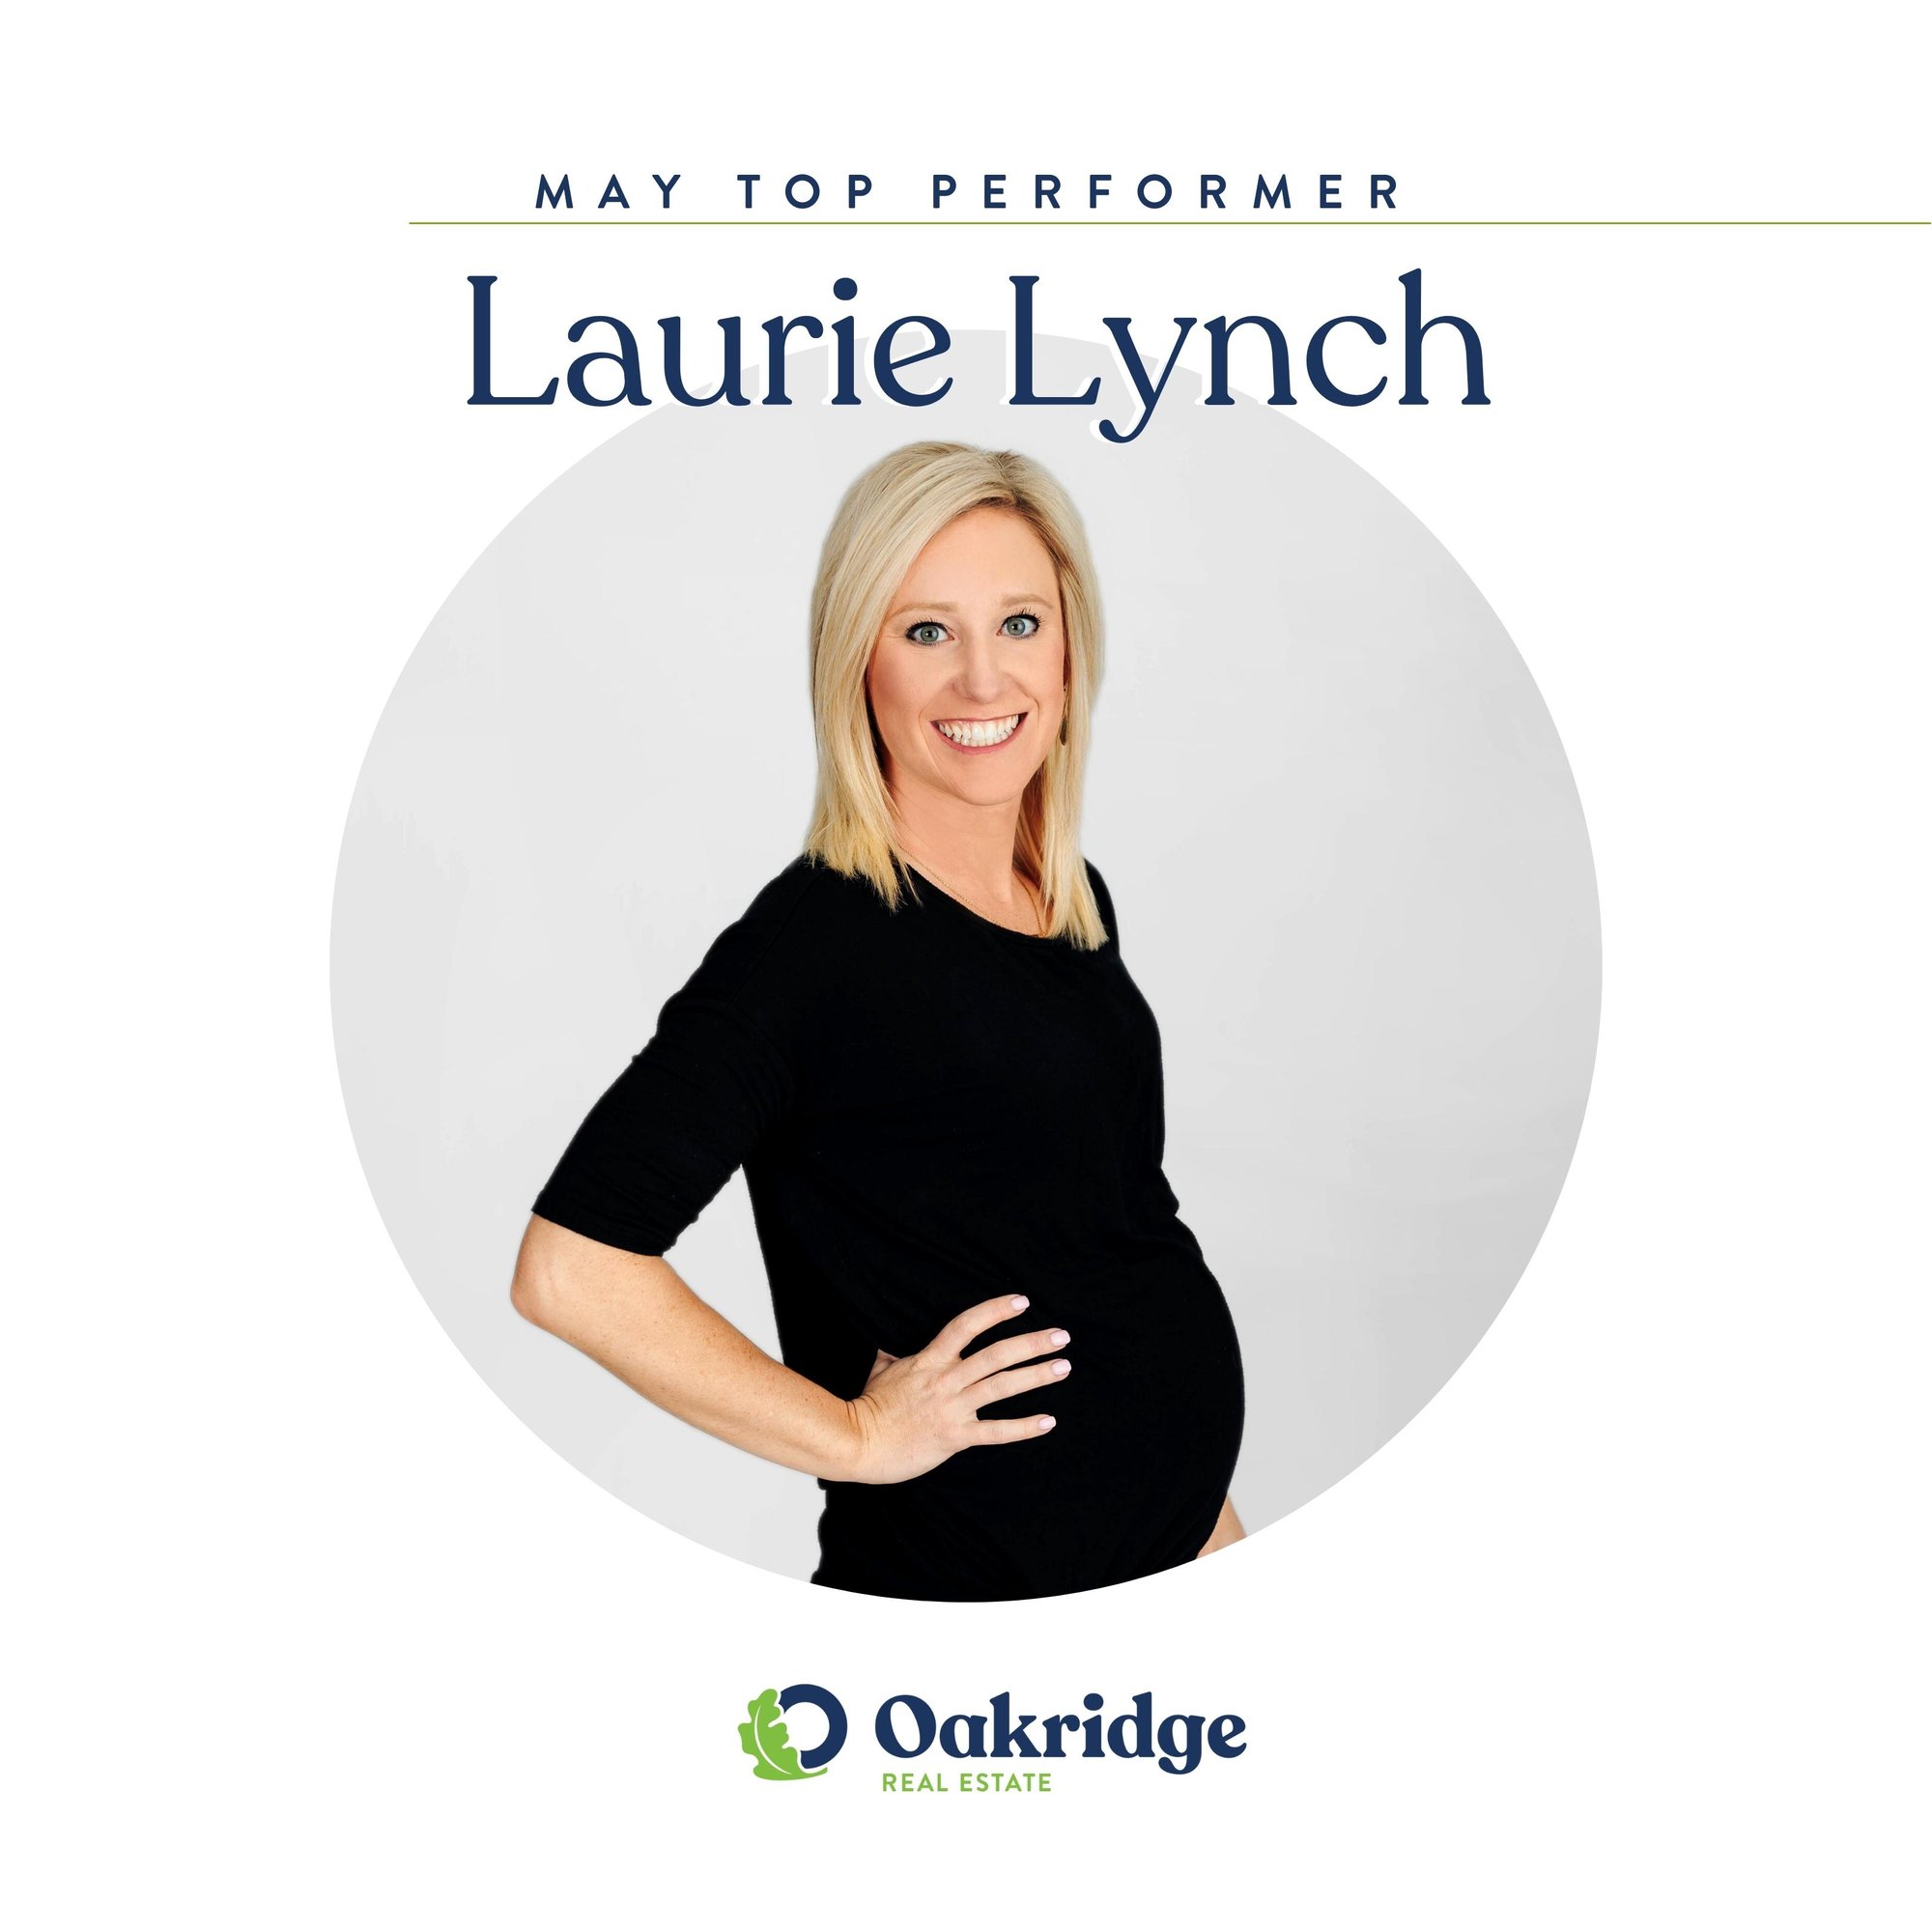 Laurie Lynch May Top Performer Oakridge Real Estate